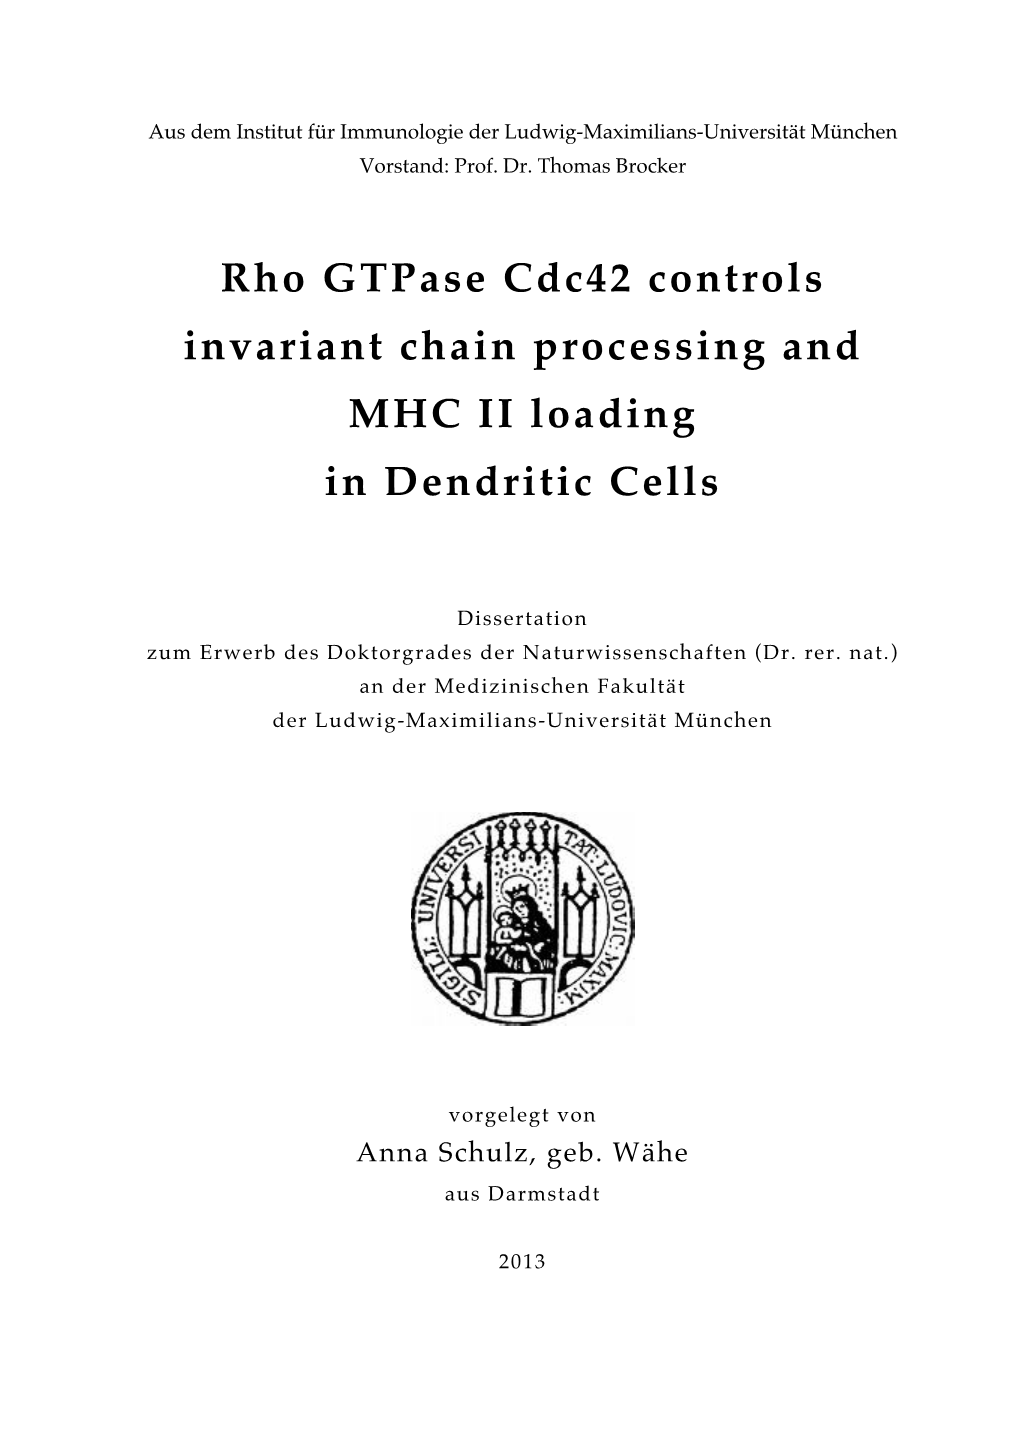 Rho Gtpase Cdc42 Controls Invariant Chain Processing and MHC II Loading in Dendritic Cells